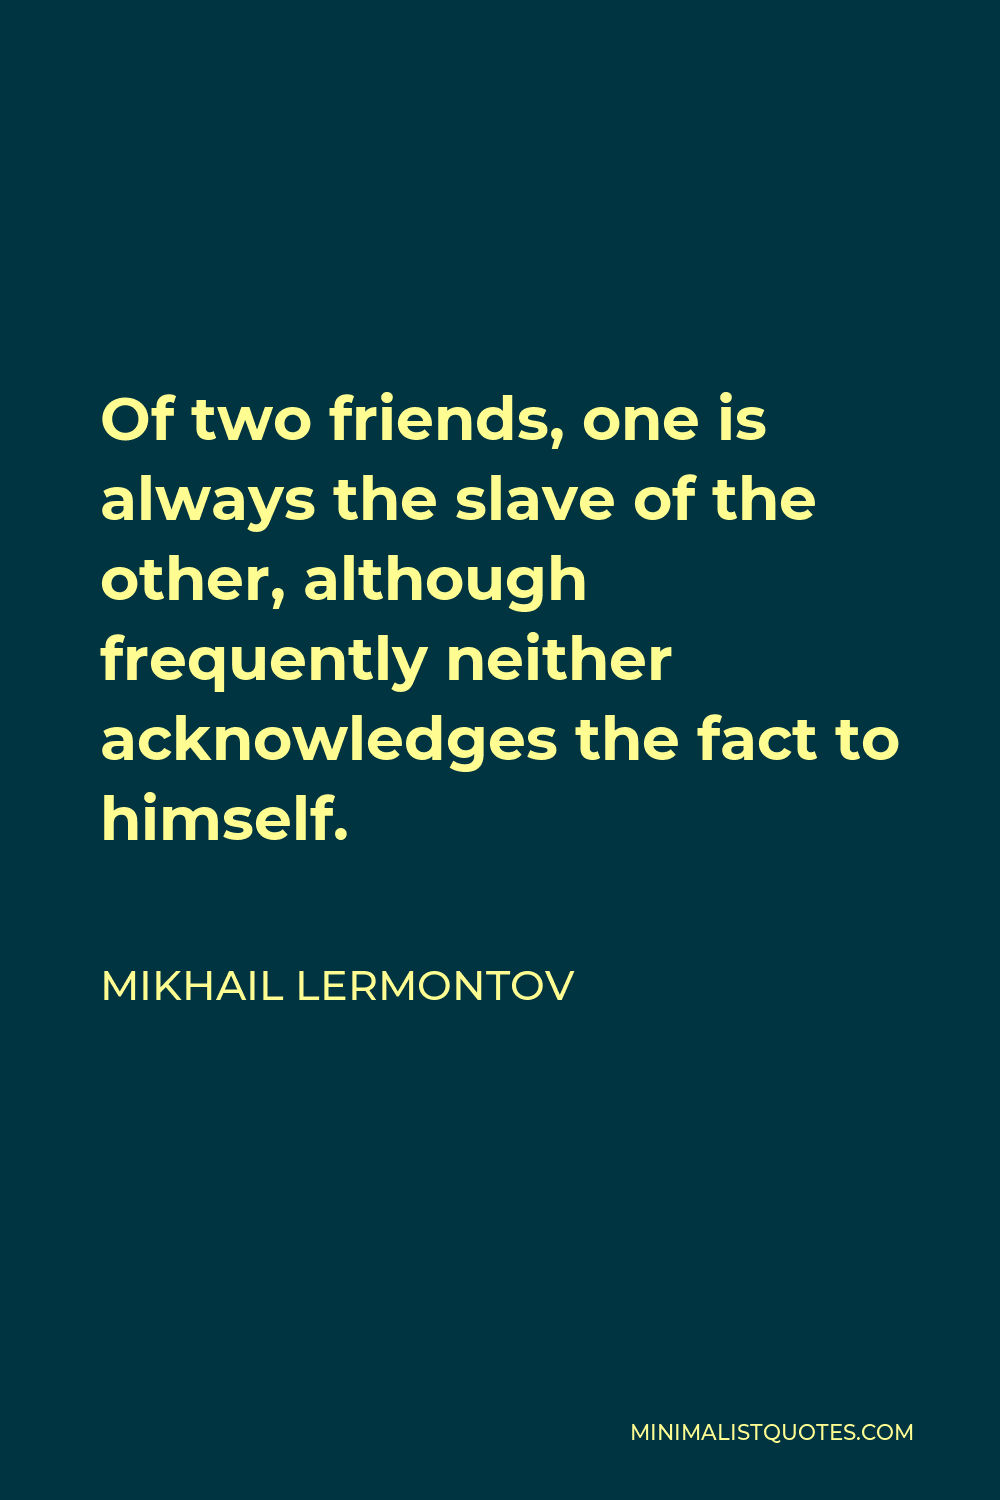 Mikhail Lermontov Quote - Of two friends, one is always the slave of the other, although frequently neither acknowledges the fact to himself.